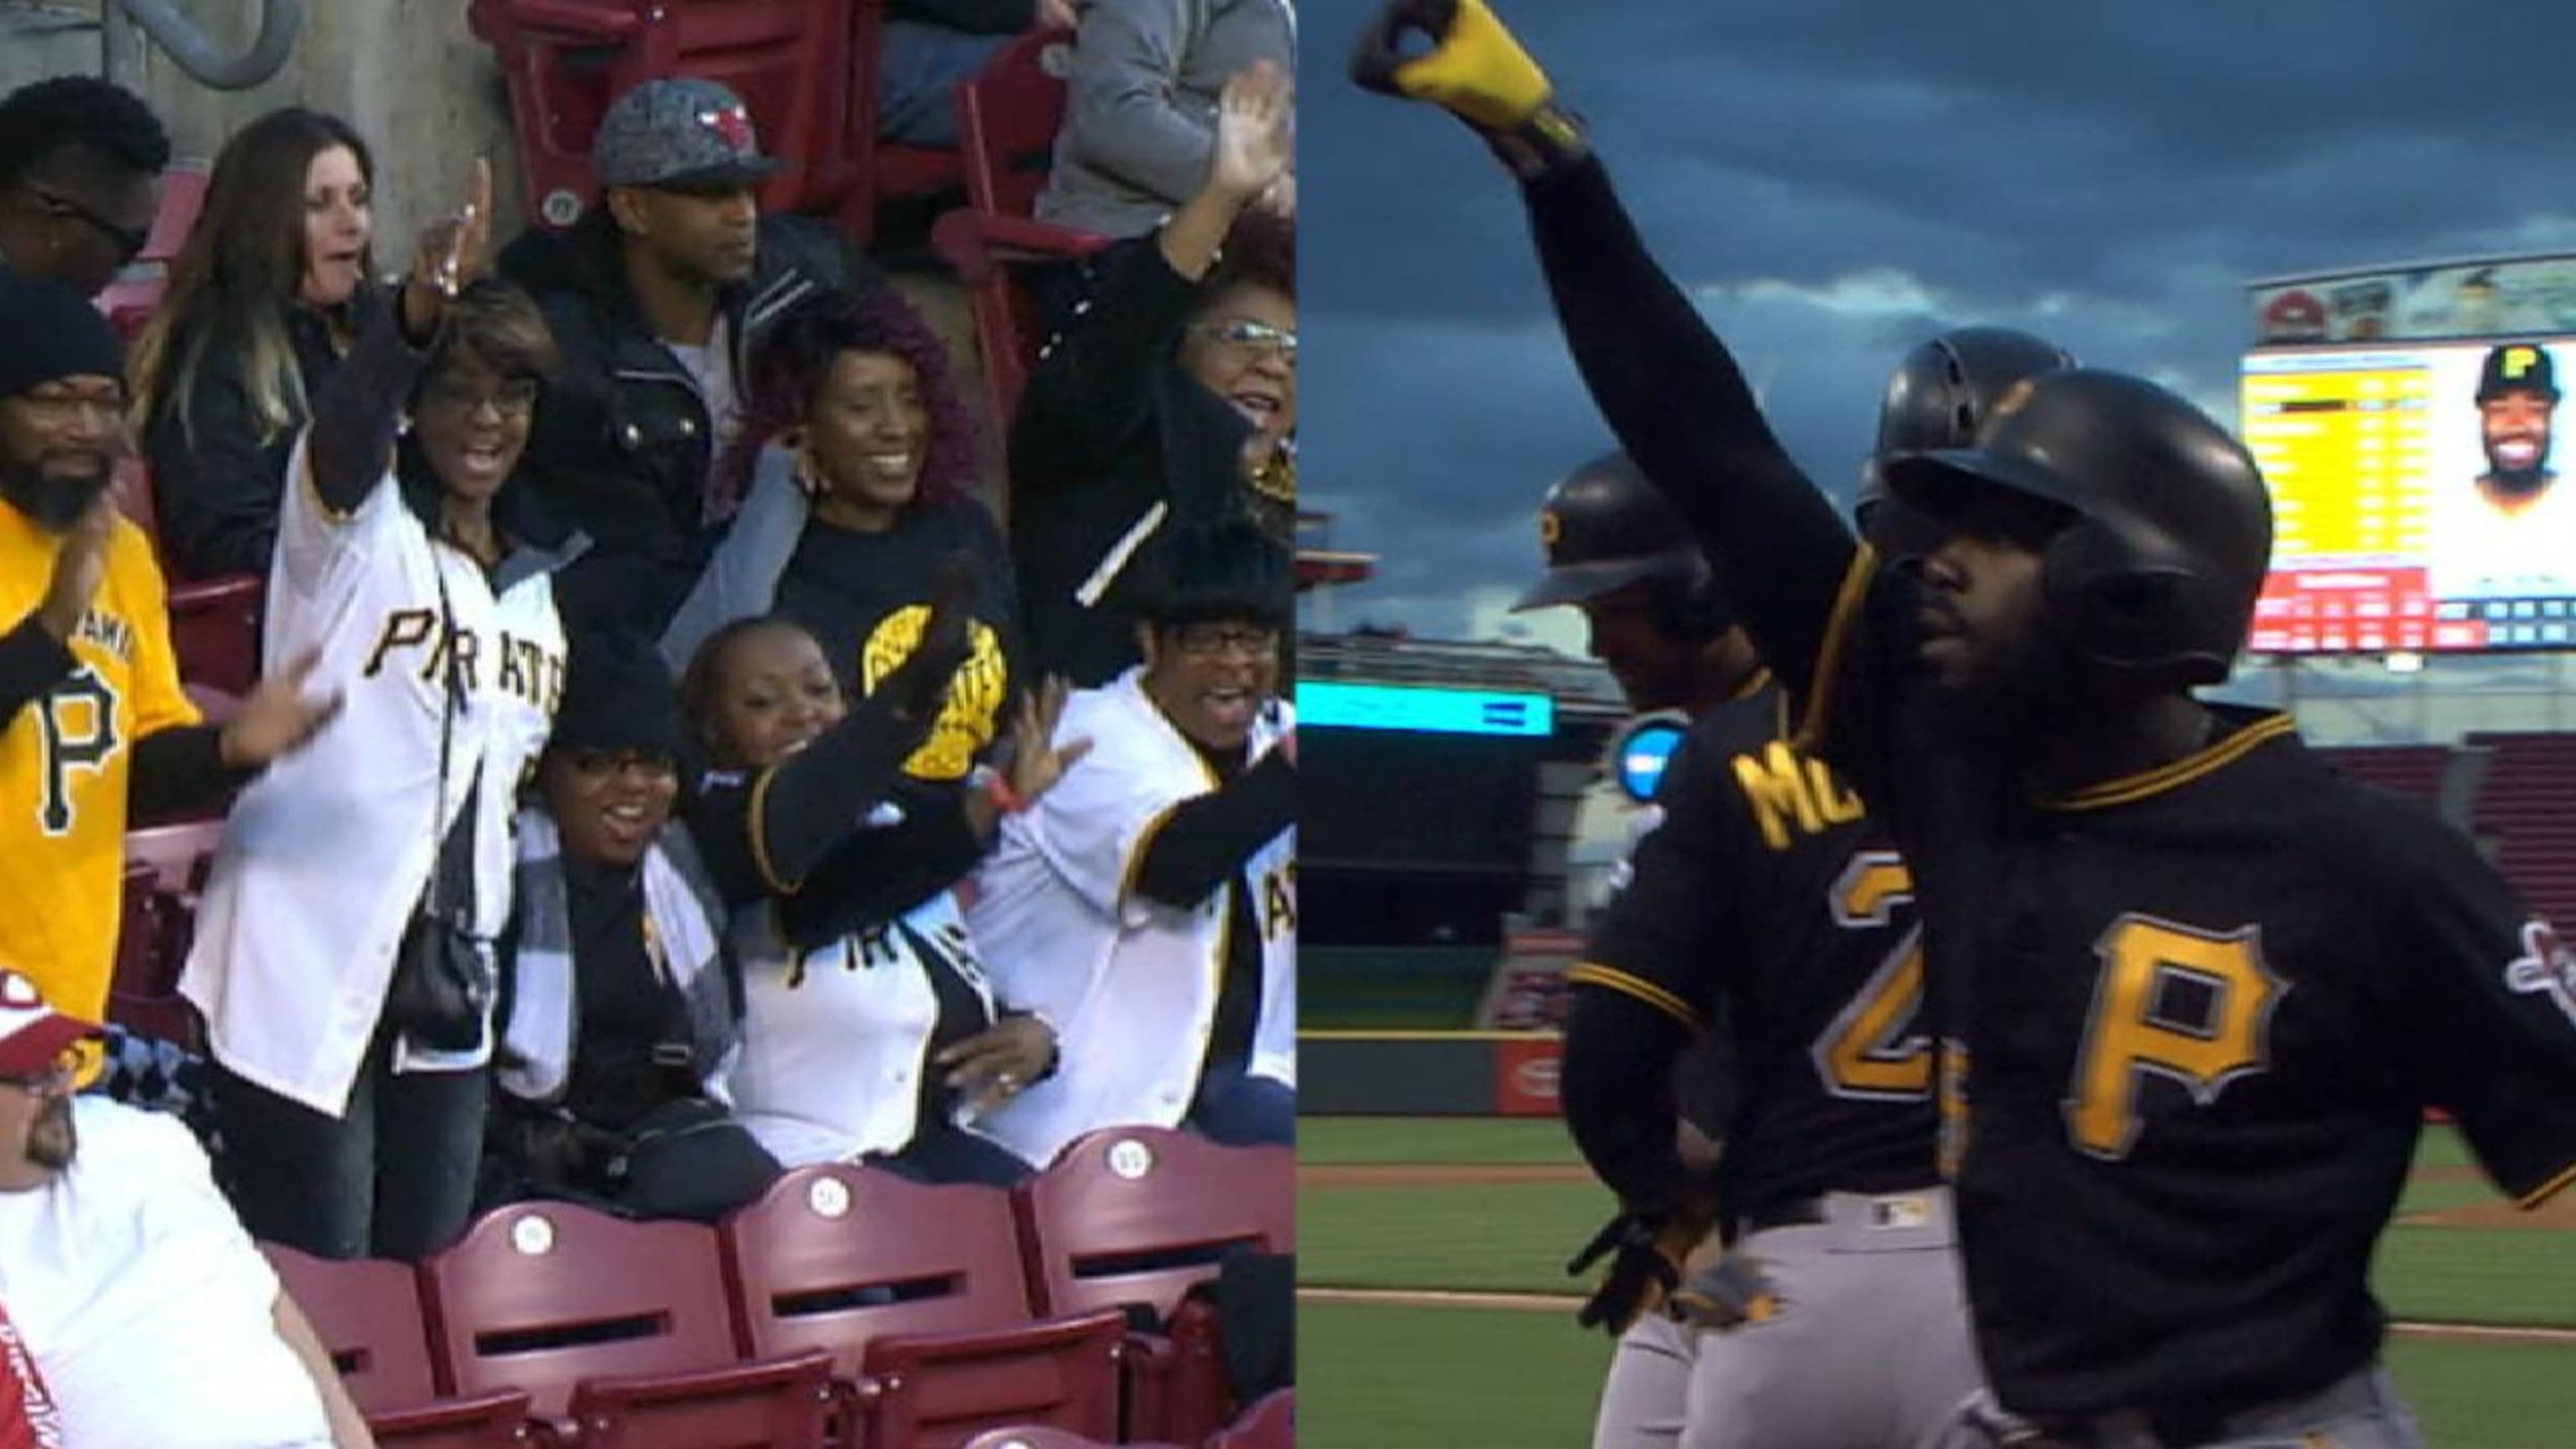 Josh Harrison was a good son and homered at his mom's command